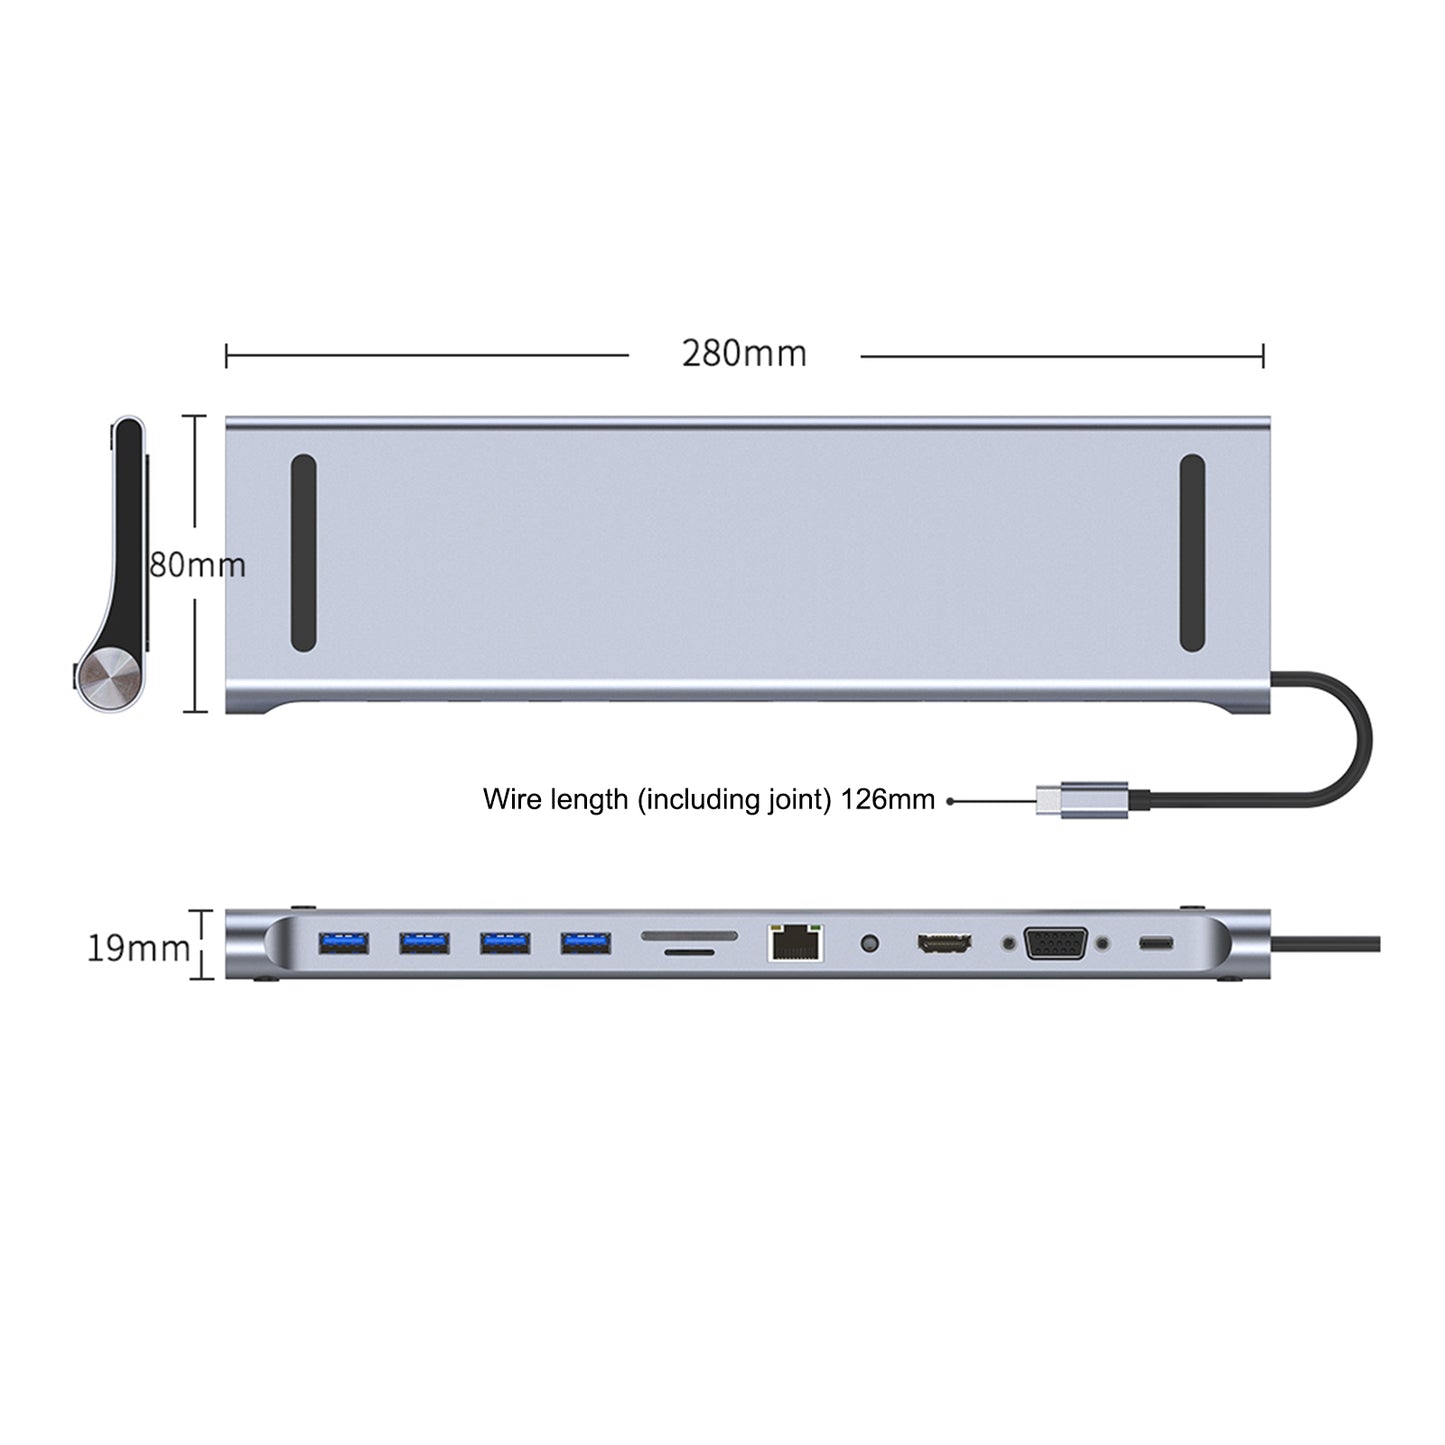 11 en 1 USB-C Type C PD 100W 4K Ports USB 3.0 HUB Station d'accueil multifonction